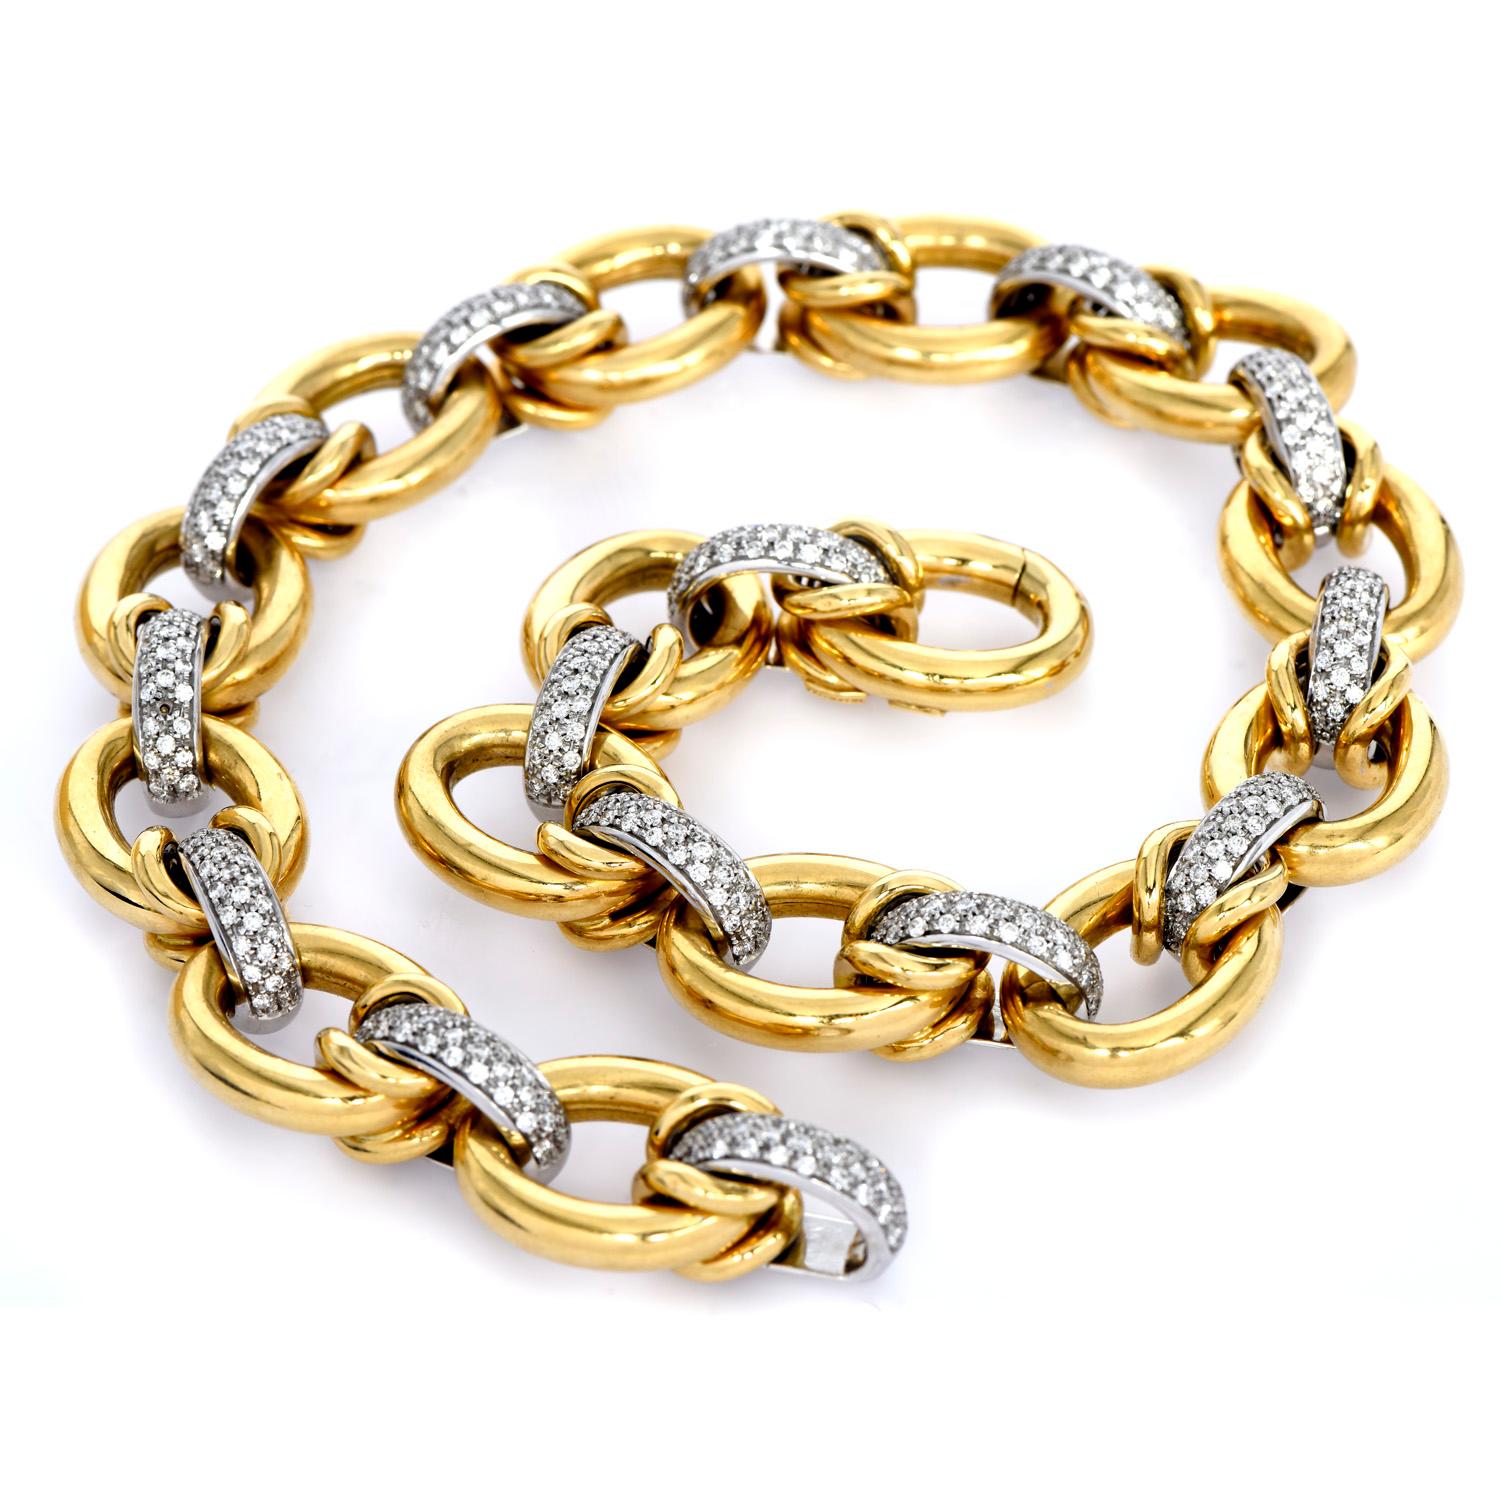 This Luxurious large link necklace was crafted in 

181.5 Grams of 18K yellow & white gold.

Single polished gold rings & cluster diamond links interconnect throughout

Made in Italy, by the designer Nicolis Cola, in the 1980s.

495 round-cut,